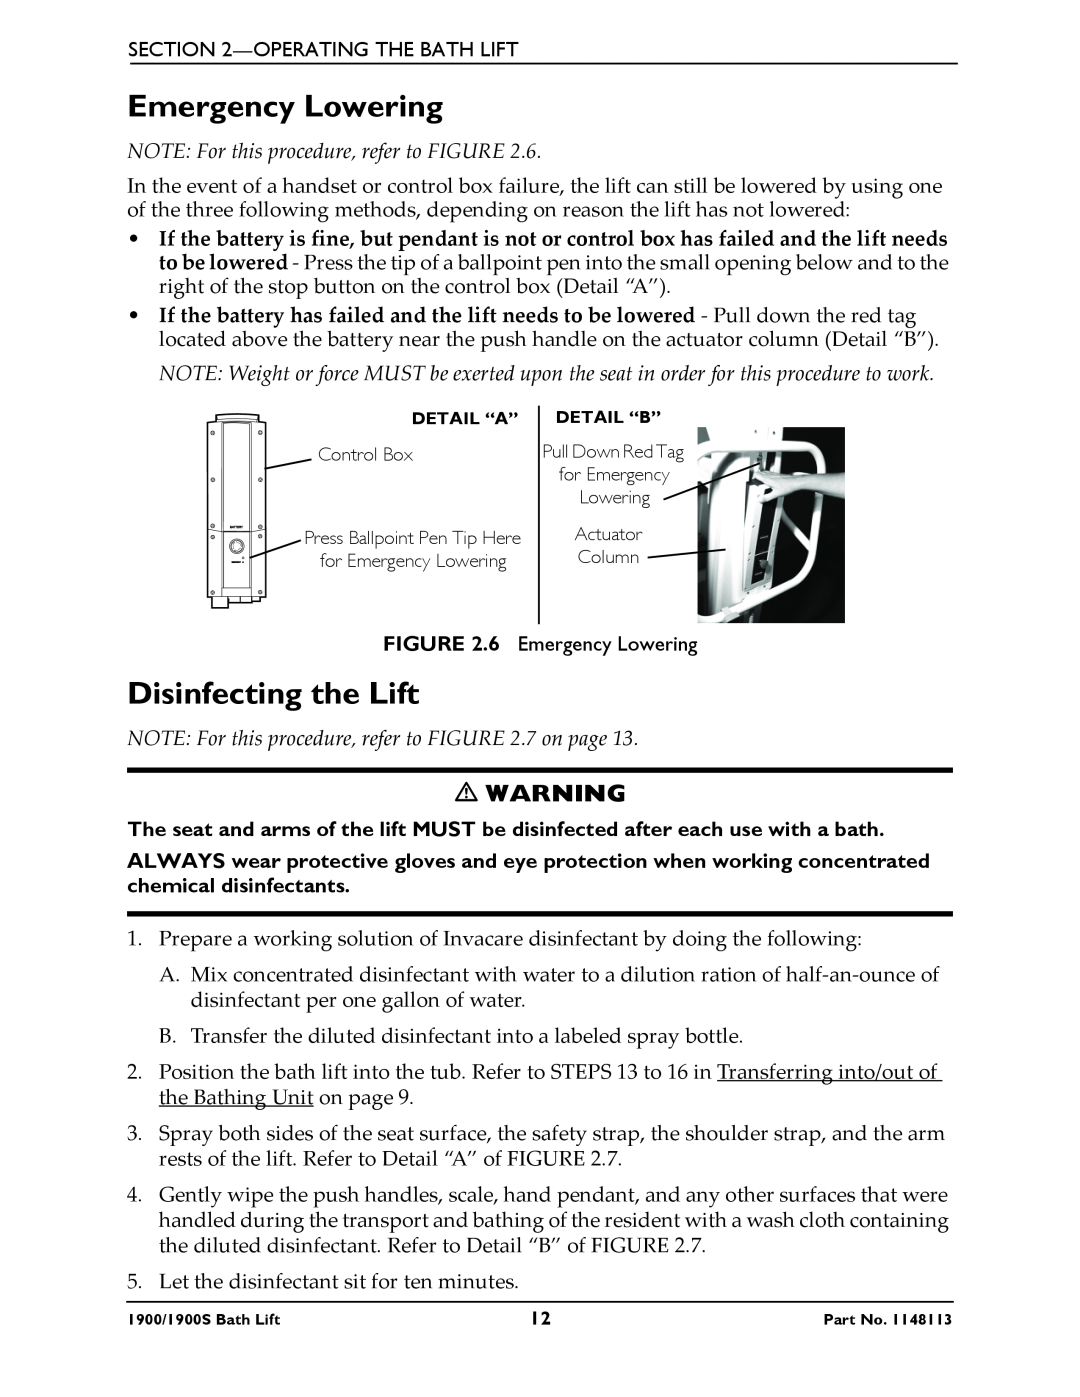 Invacare 1900S manual Emergency Lowering, Disinfecting the Lift 